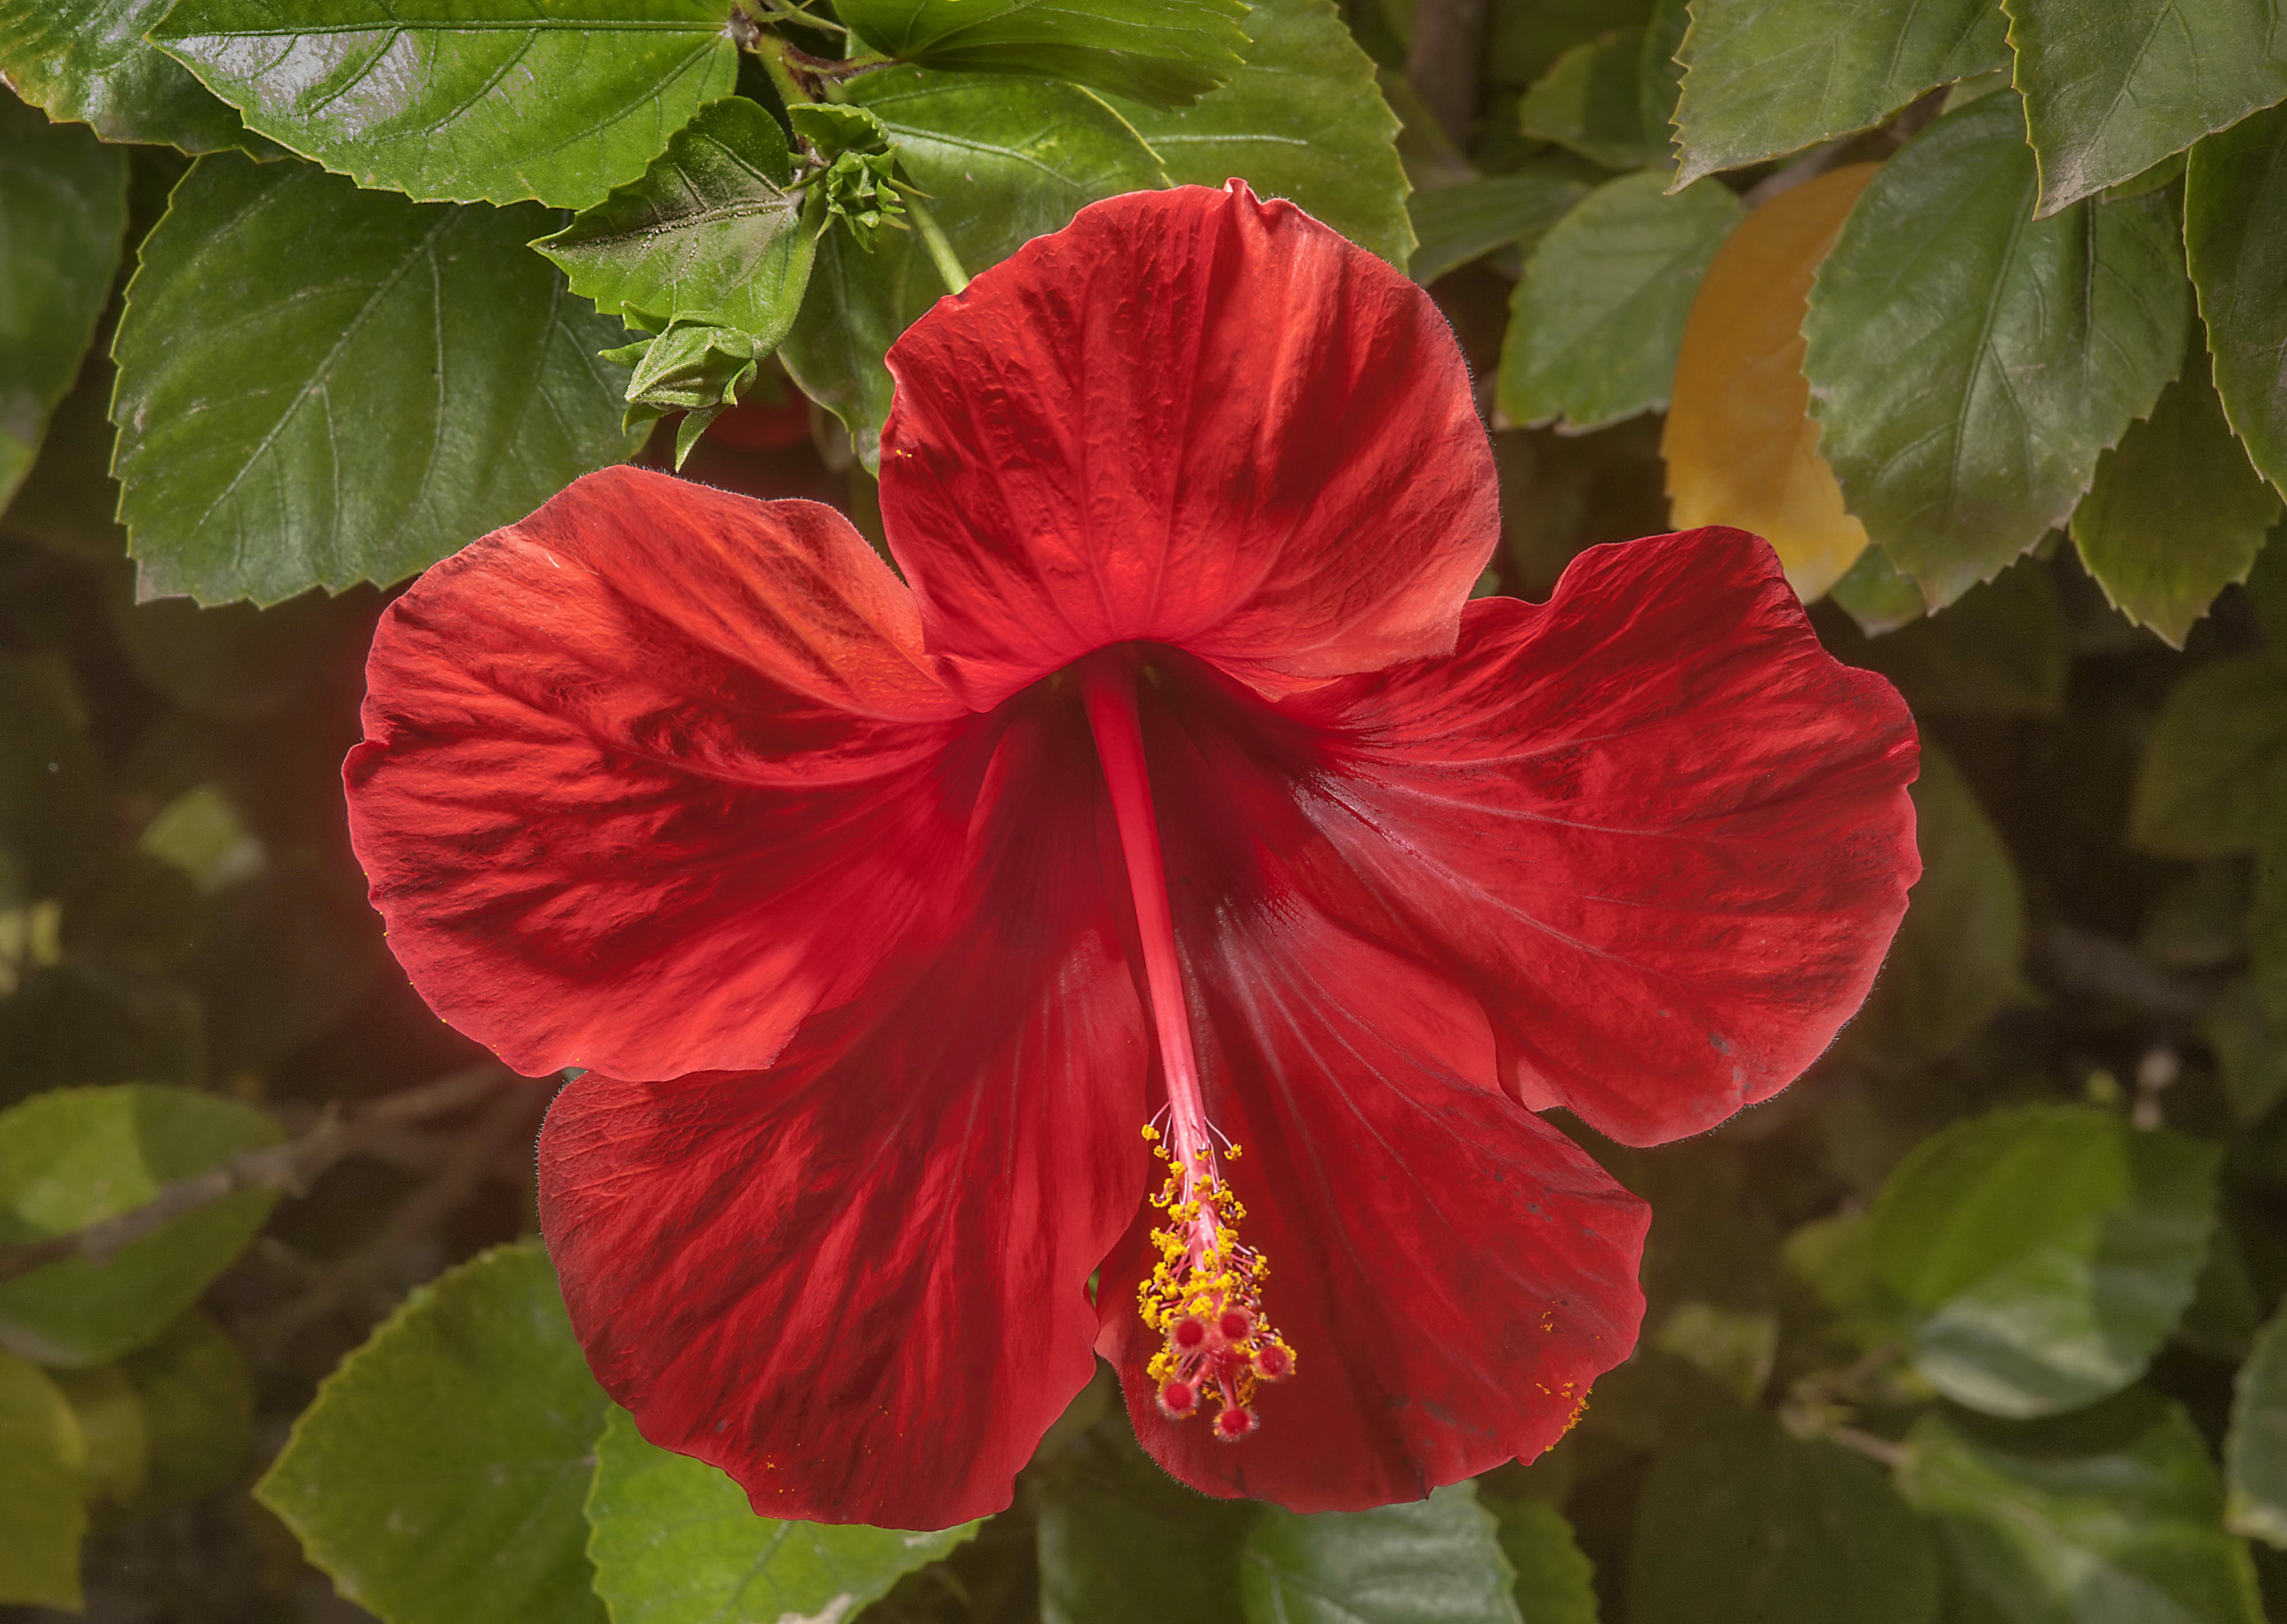 Earth Flower Hibiscus Close Up Red Flower 2999x2130